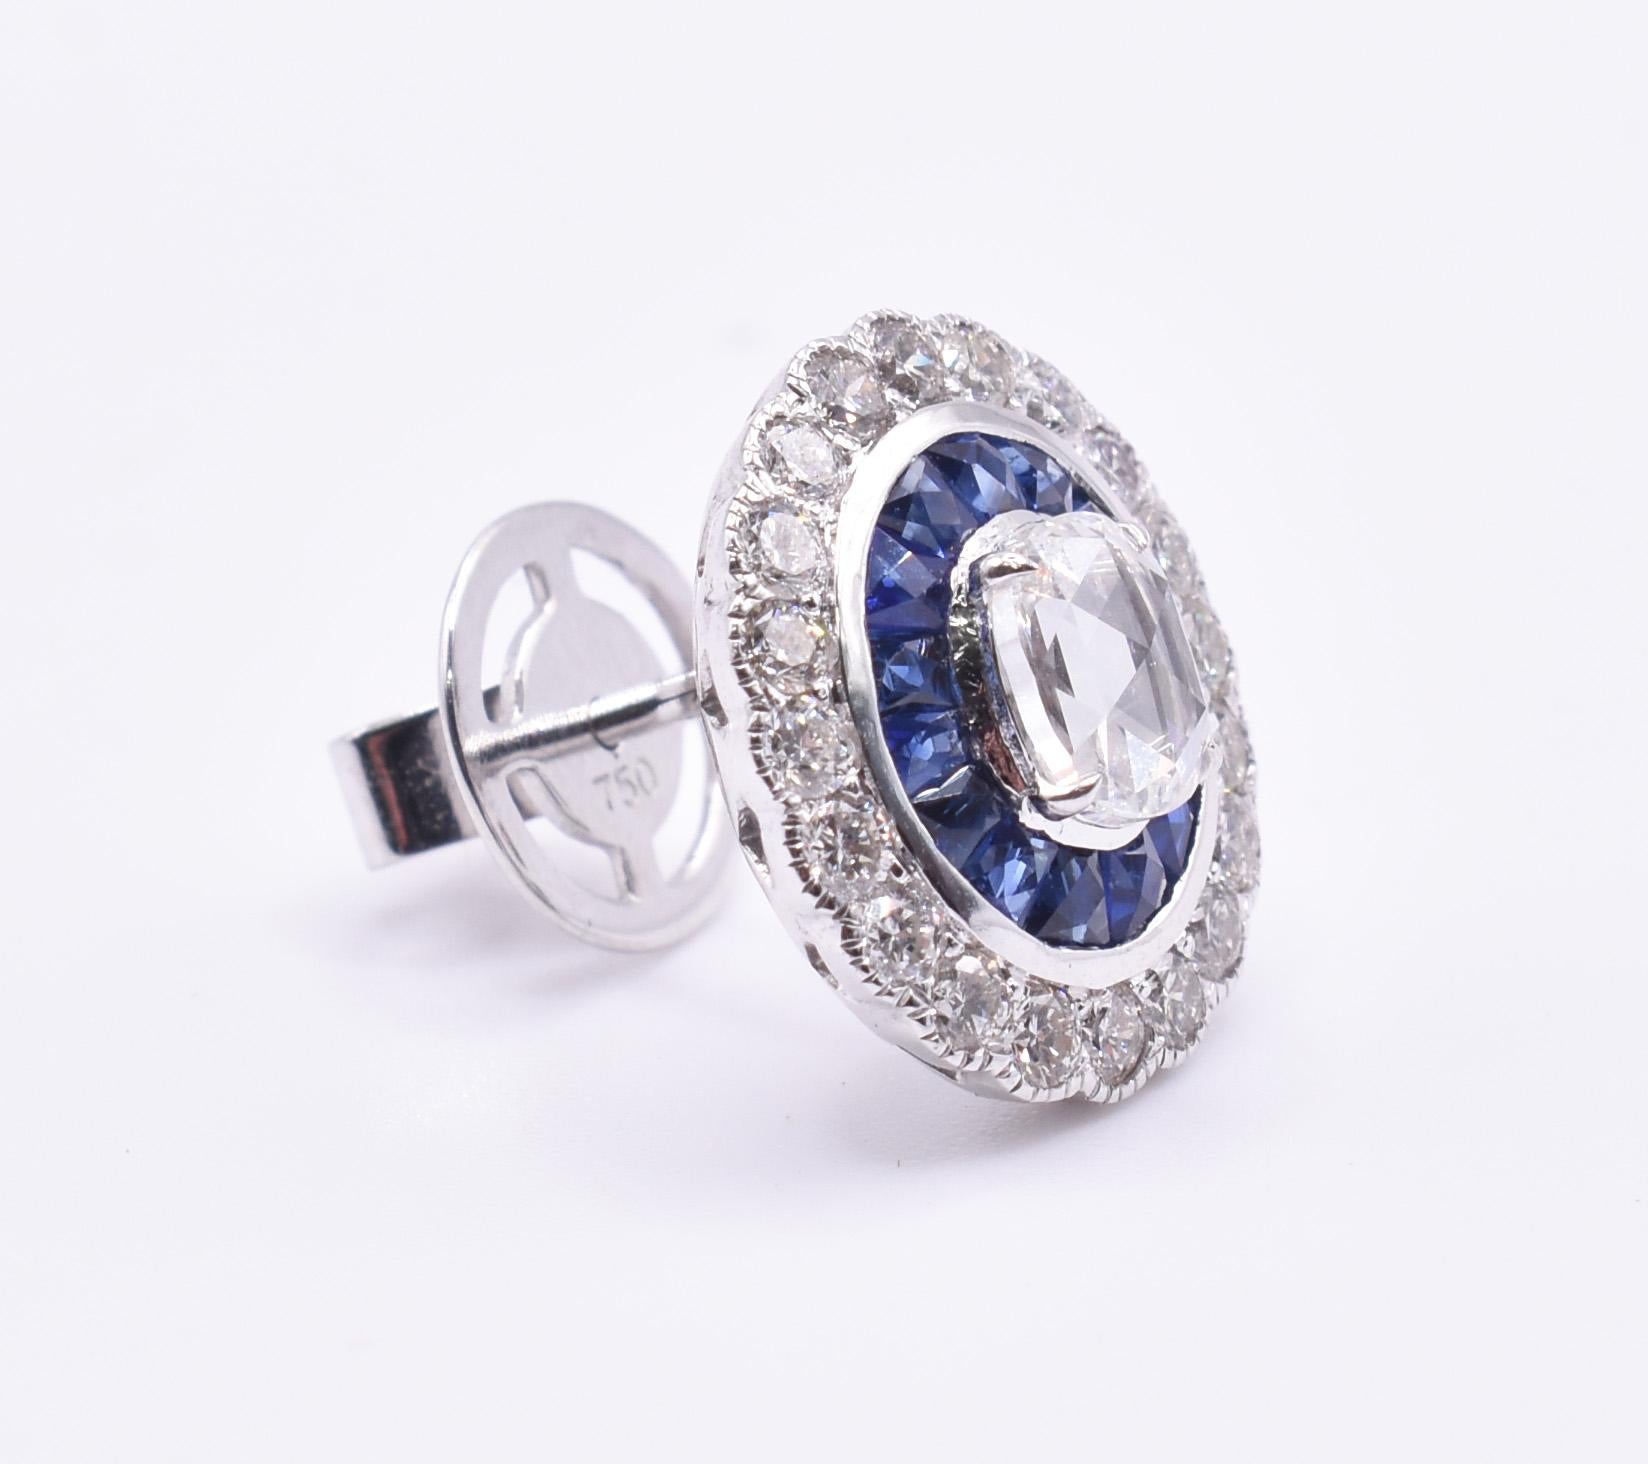 Pair of 18k Art Deco Style White Gold Diamond and Sapphire Stud Earrings In New Condition For Sale In Chelmsford, GB